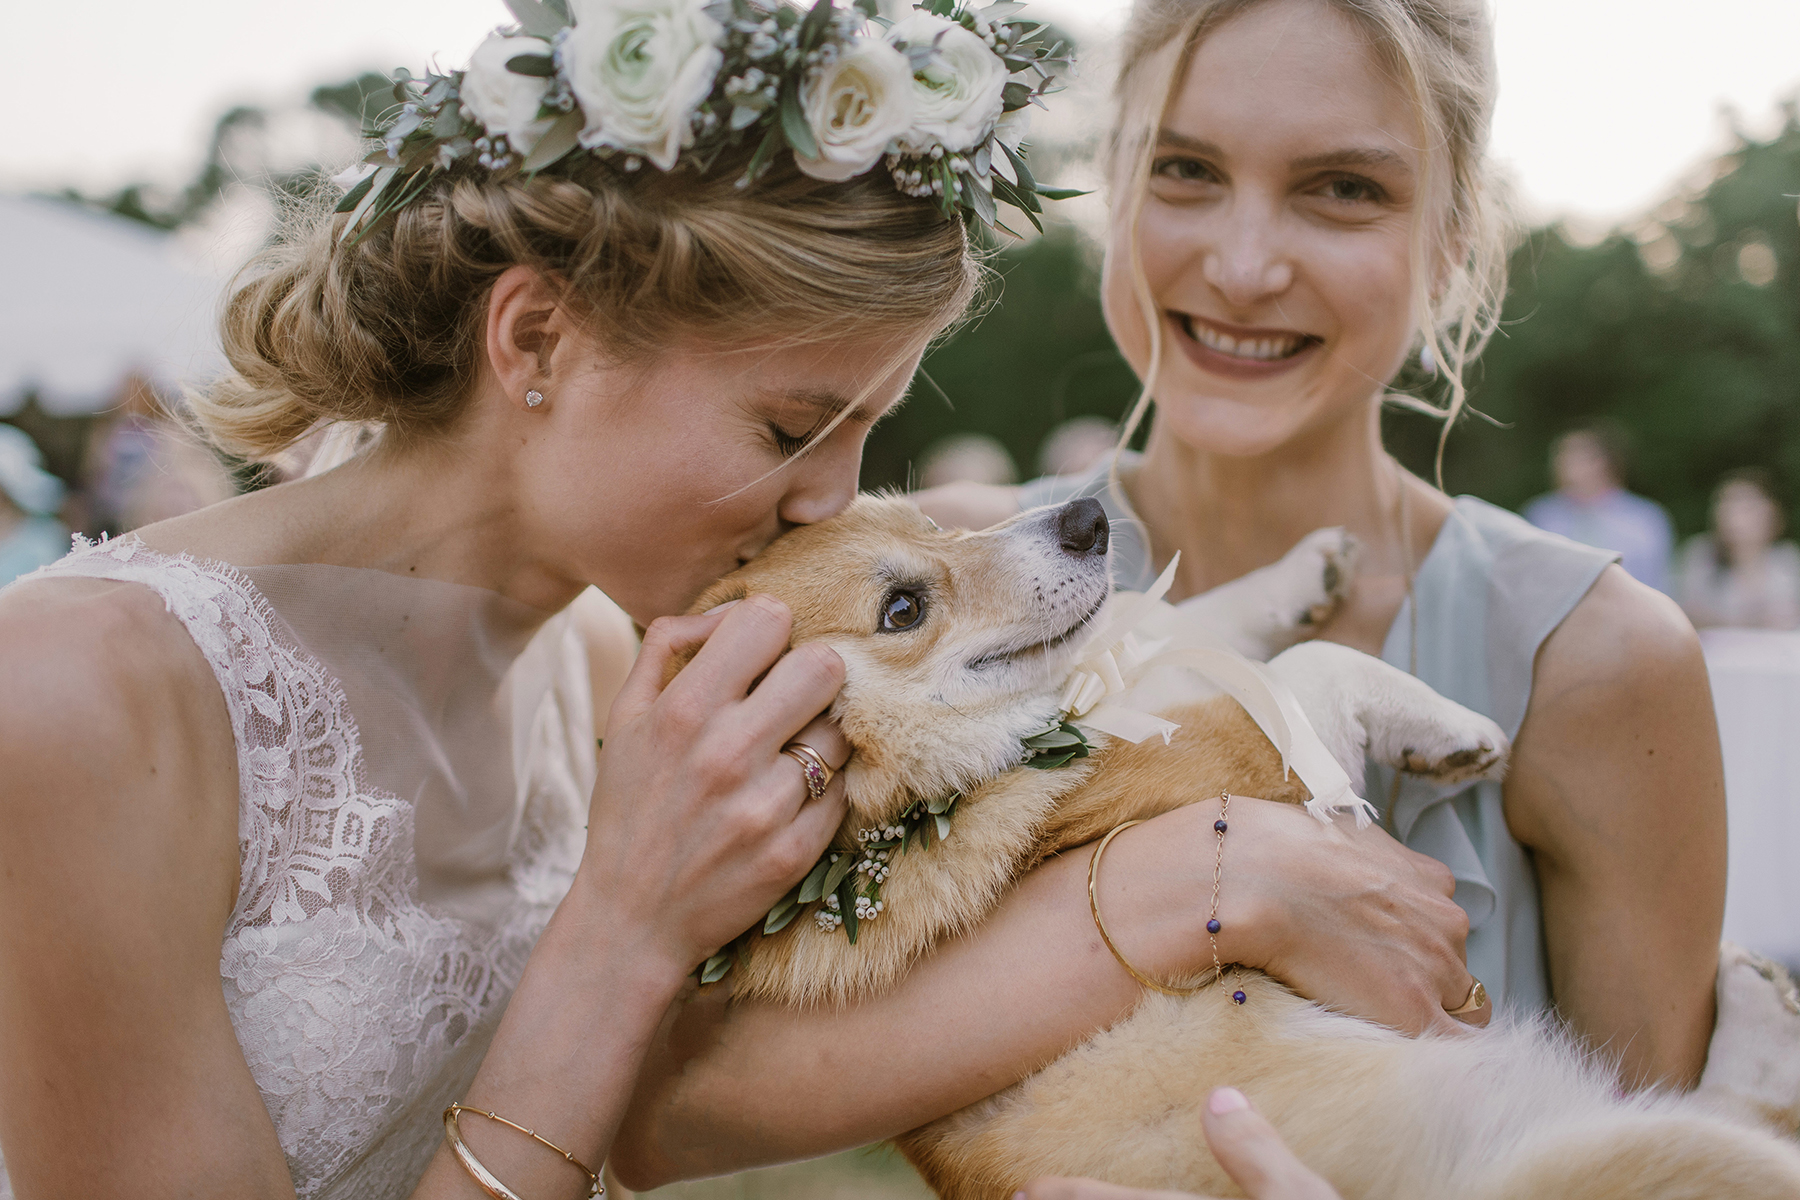 A blond woman in a grey dress looks at you and smiles as she holds a dog, and a woman in a flower crown and a wedding dress kisses the dog's head in a Sarah Gormley photo